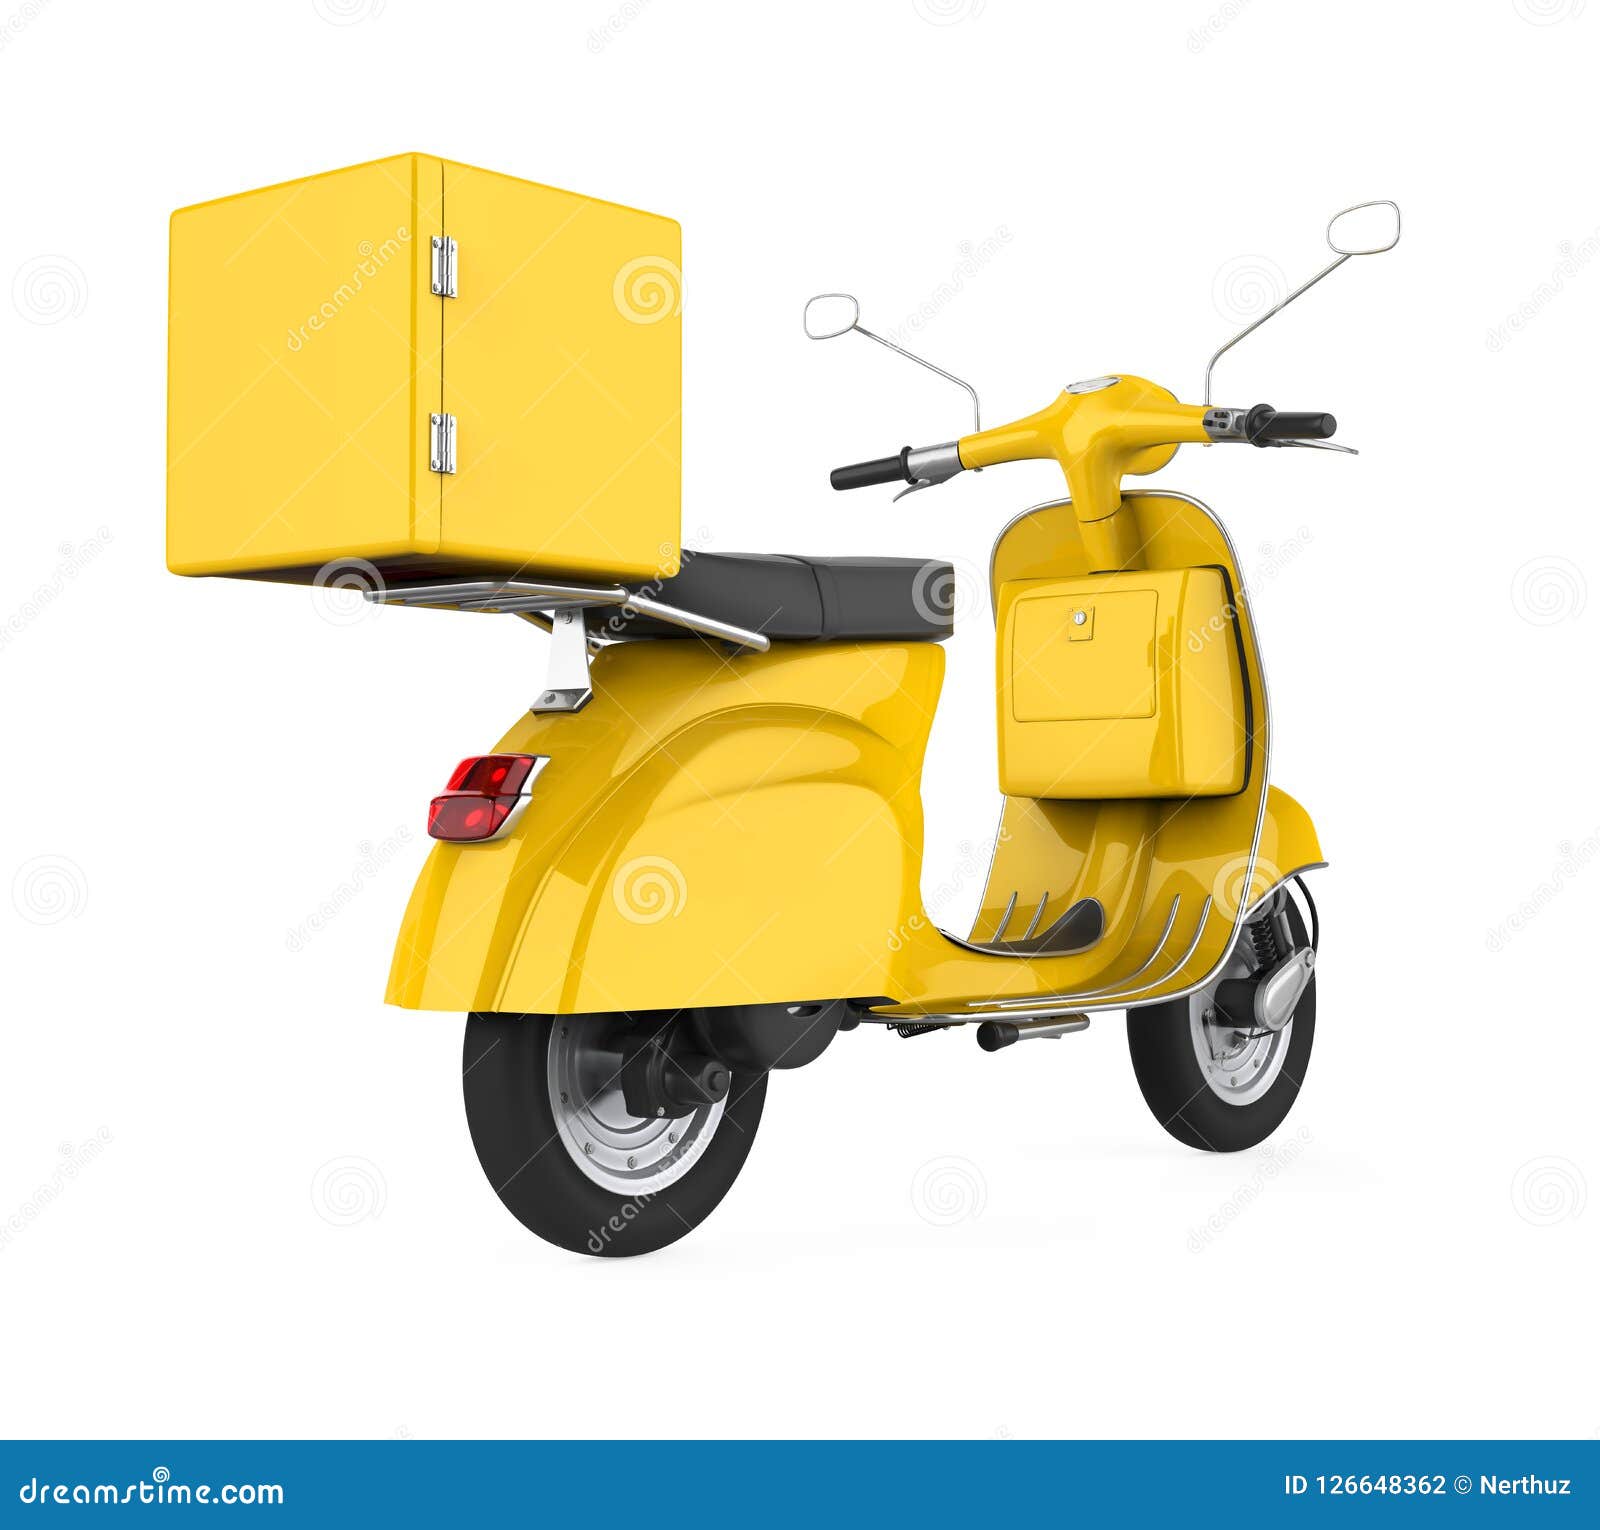 motorcycle deliveries